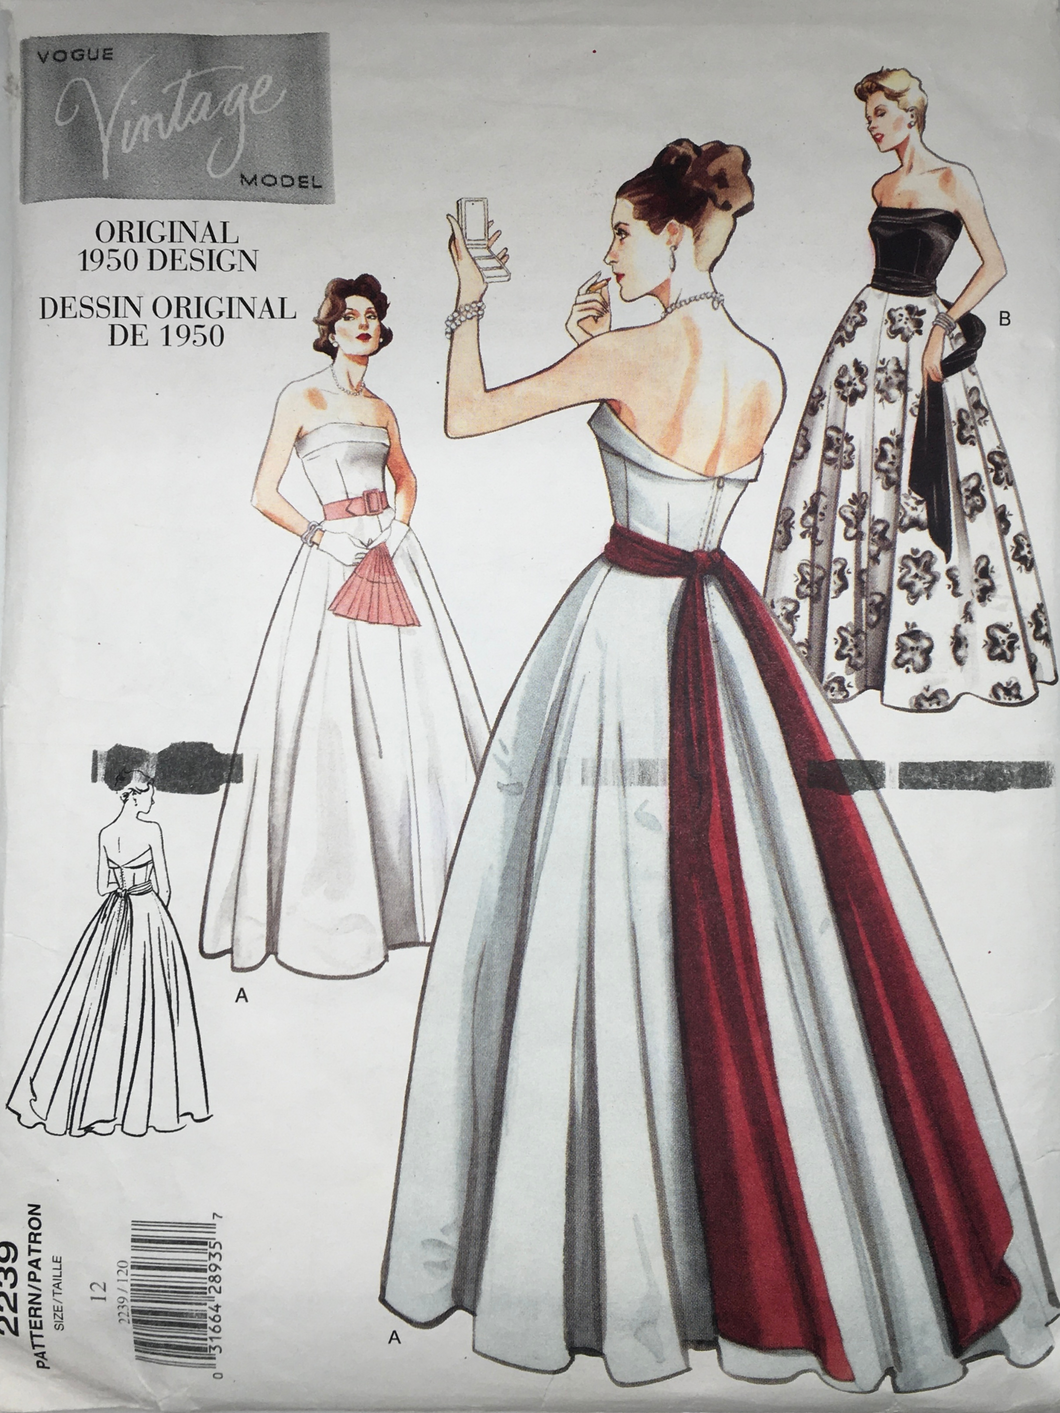 1950's Reproduction Vintage Sewing Pattern: Vogue 2239